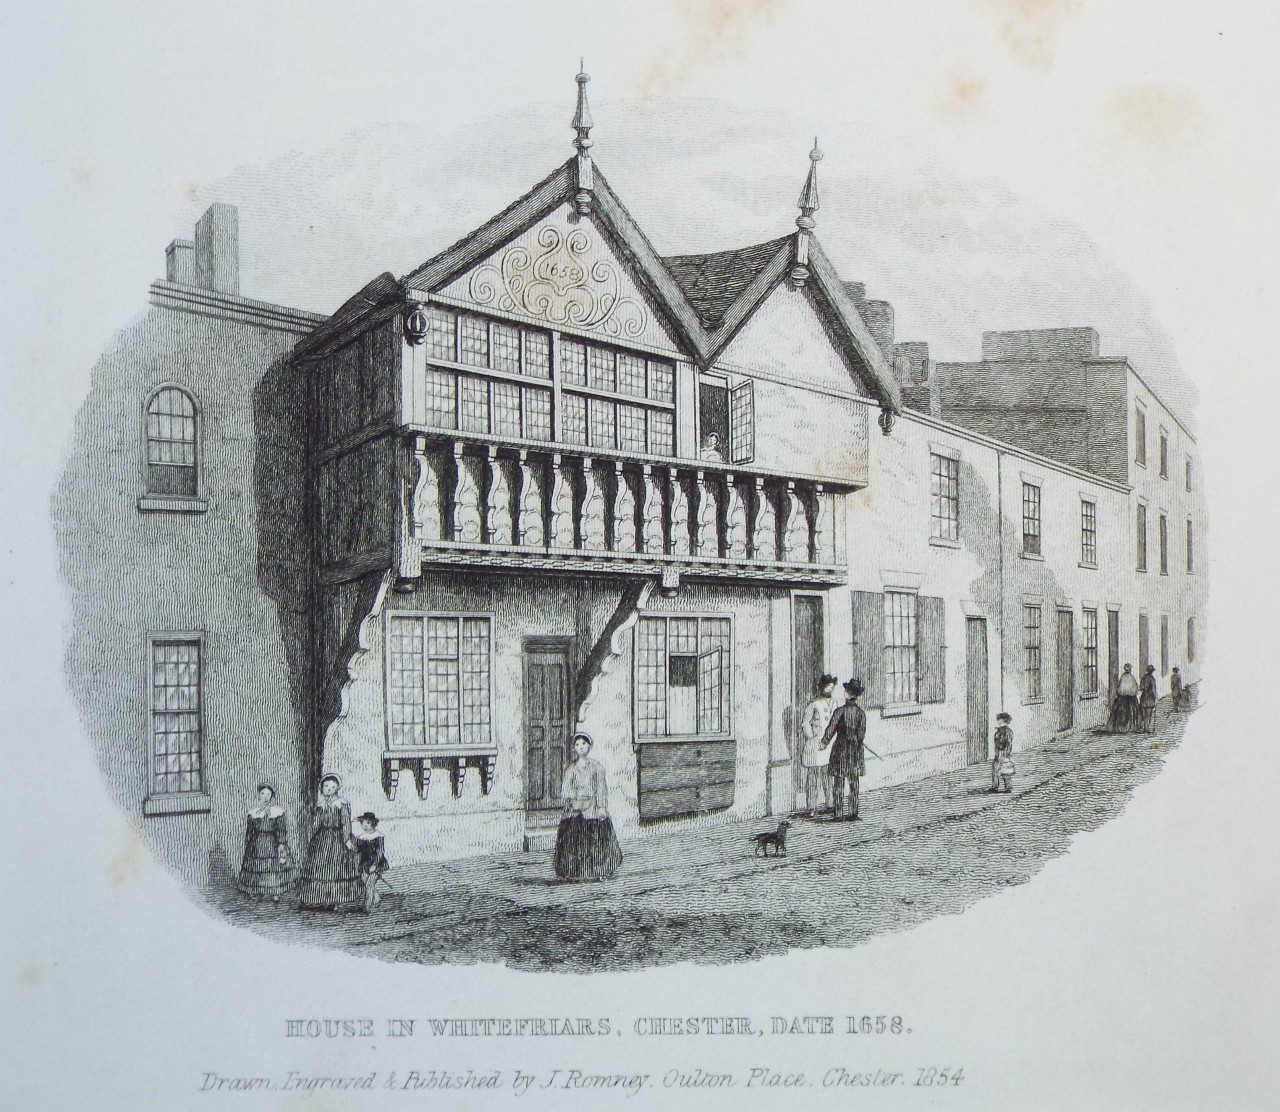 Print - House in Whitefriars, Chester, Date 1658. - Romney